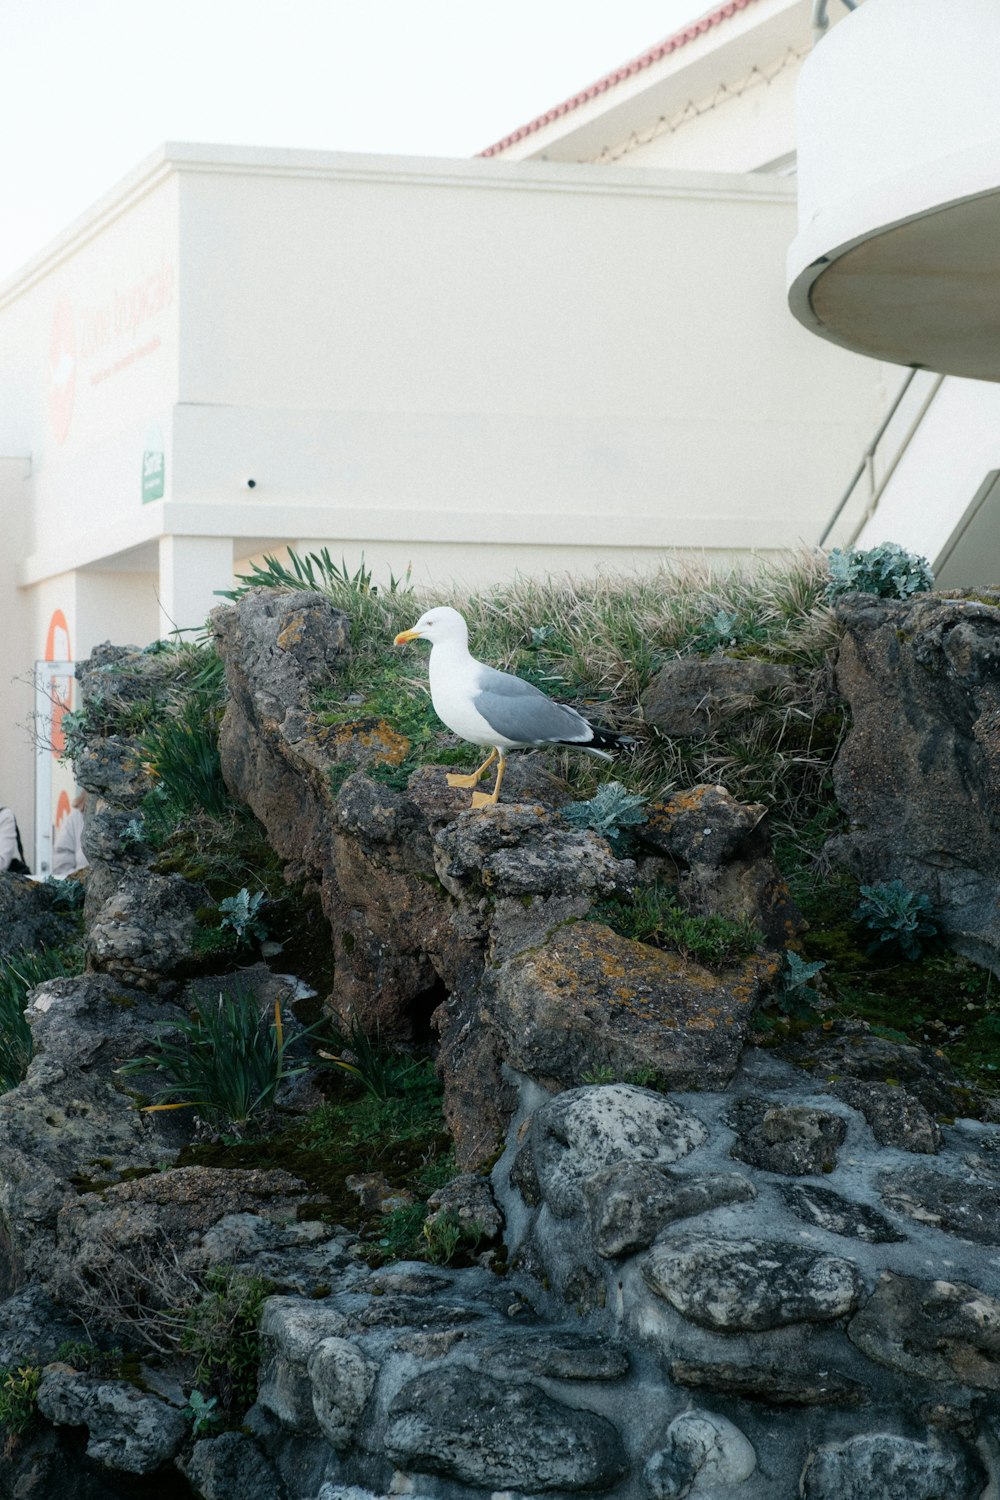 a seagull sitting on a rock wall next to a building